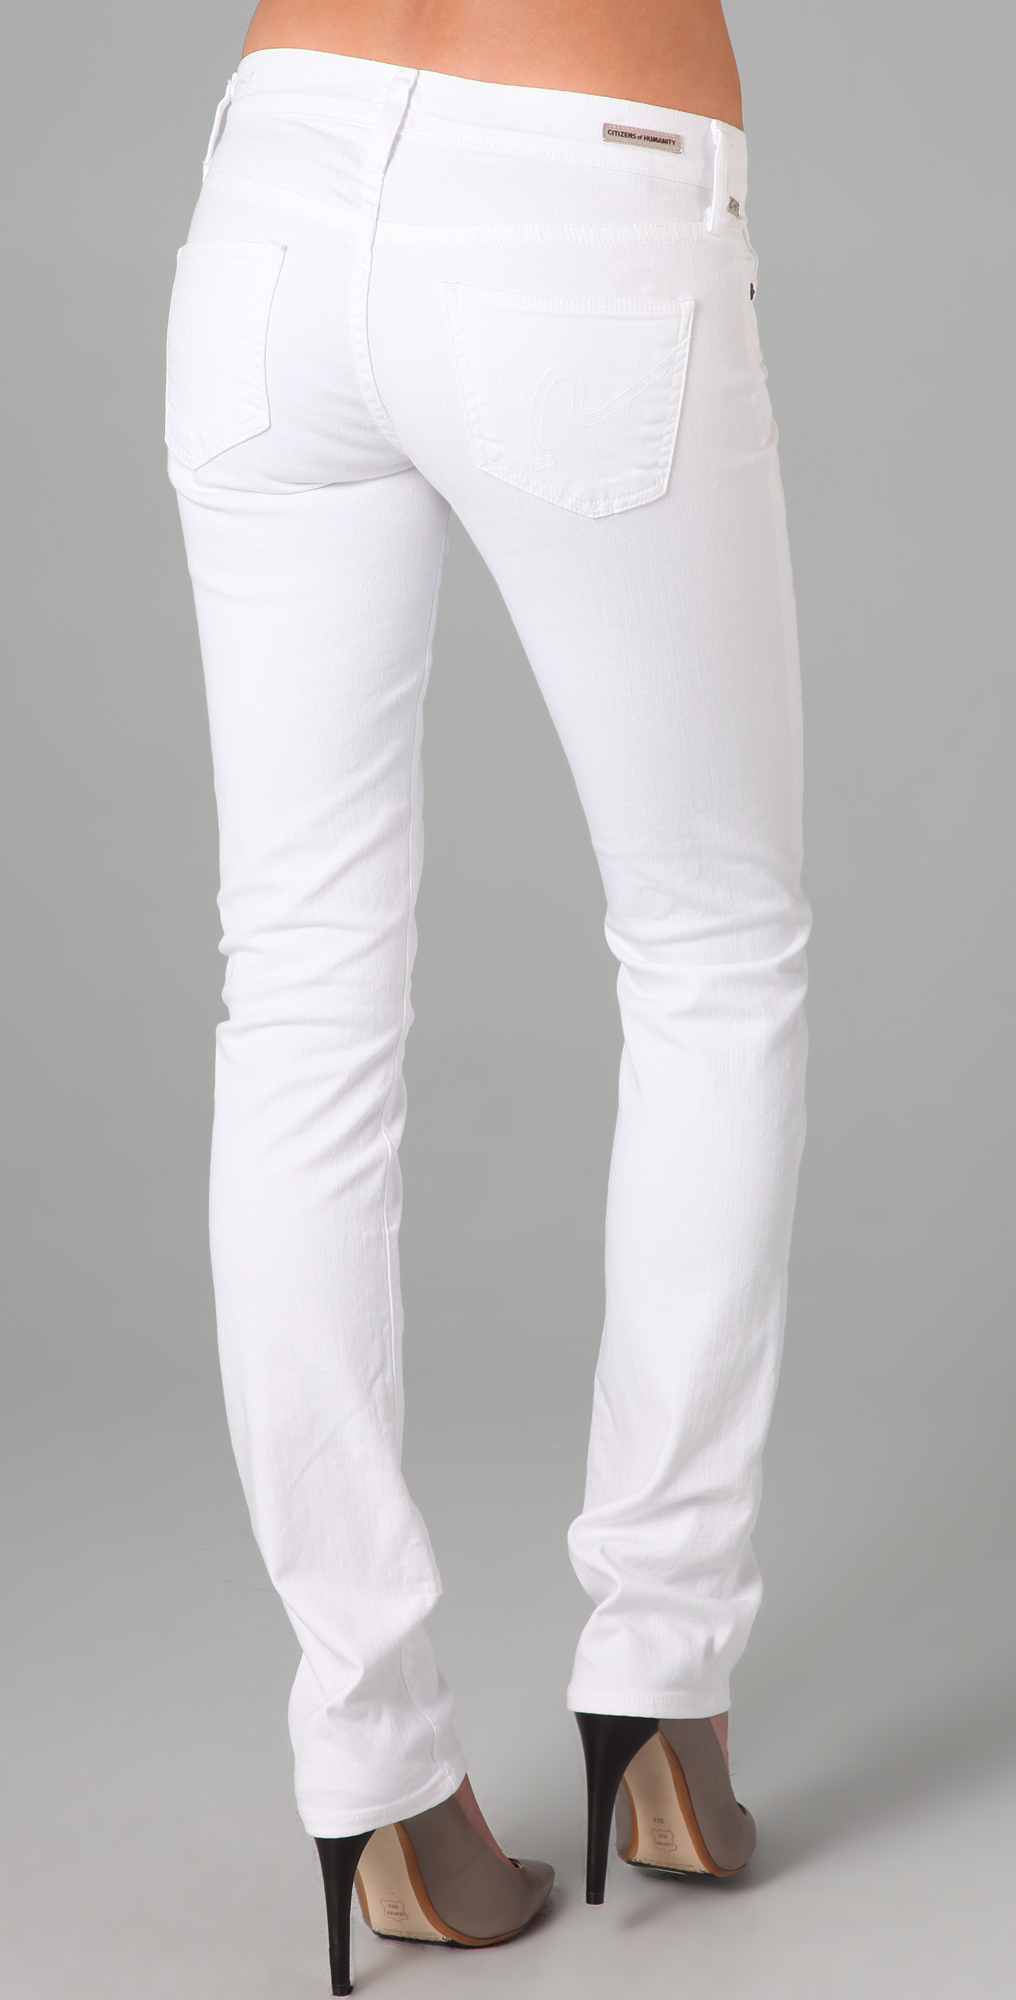 Citizens of Humanity Ava Straight Leg Jeans in White | Lyst